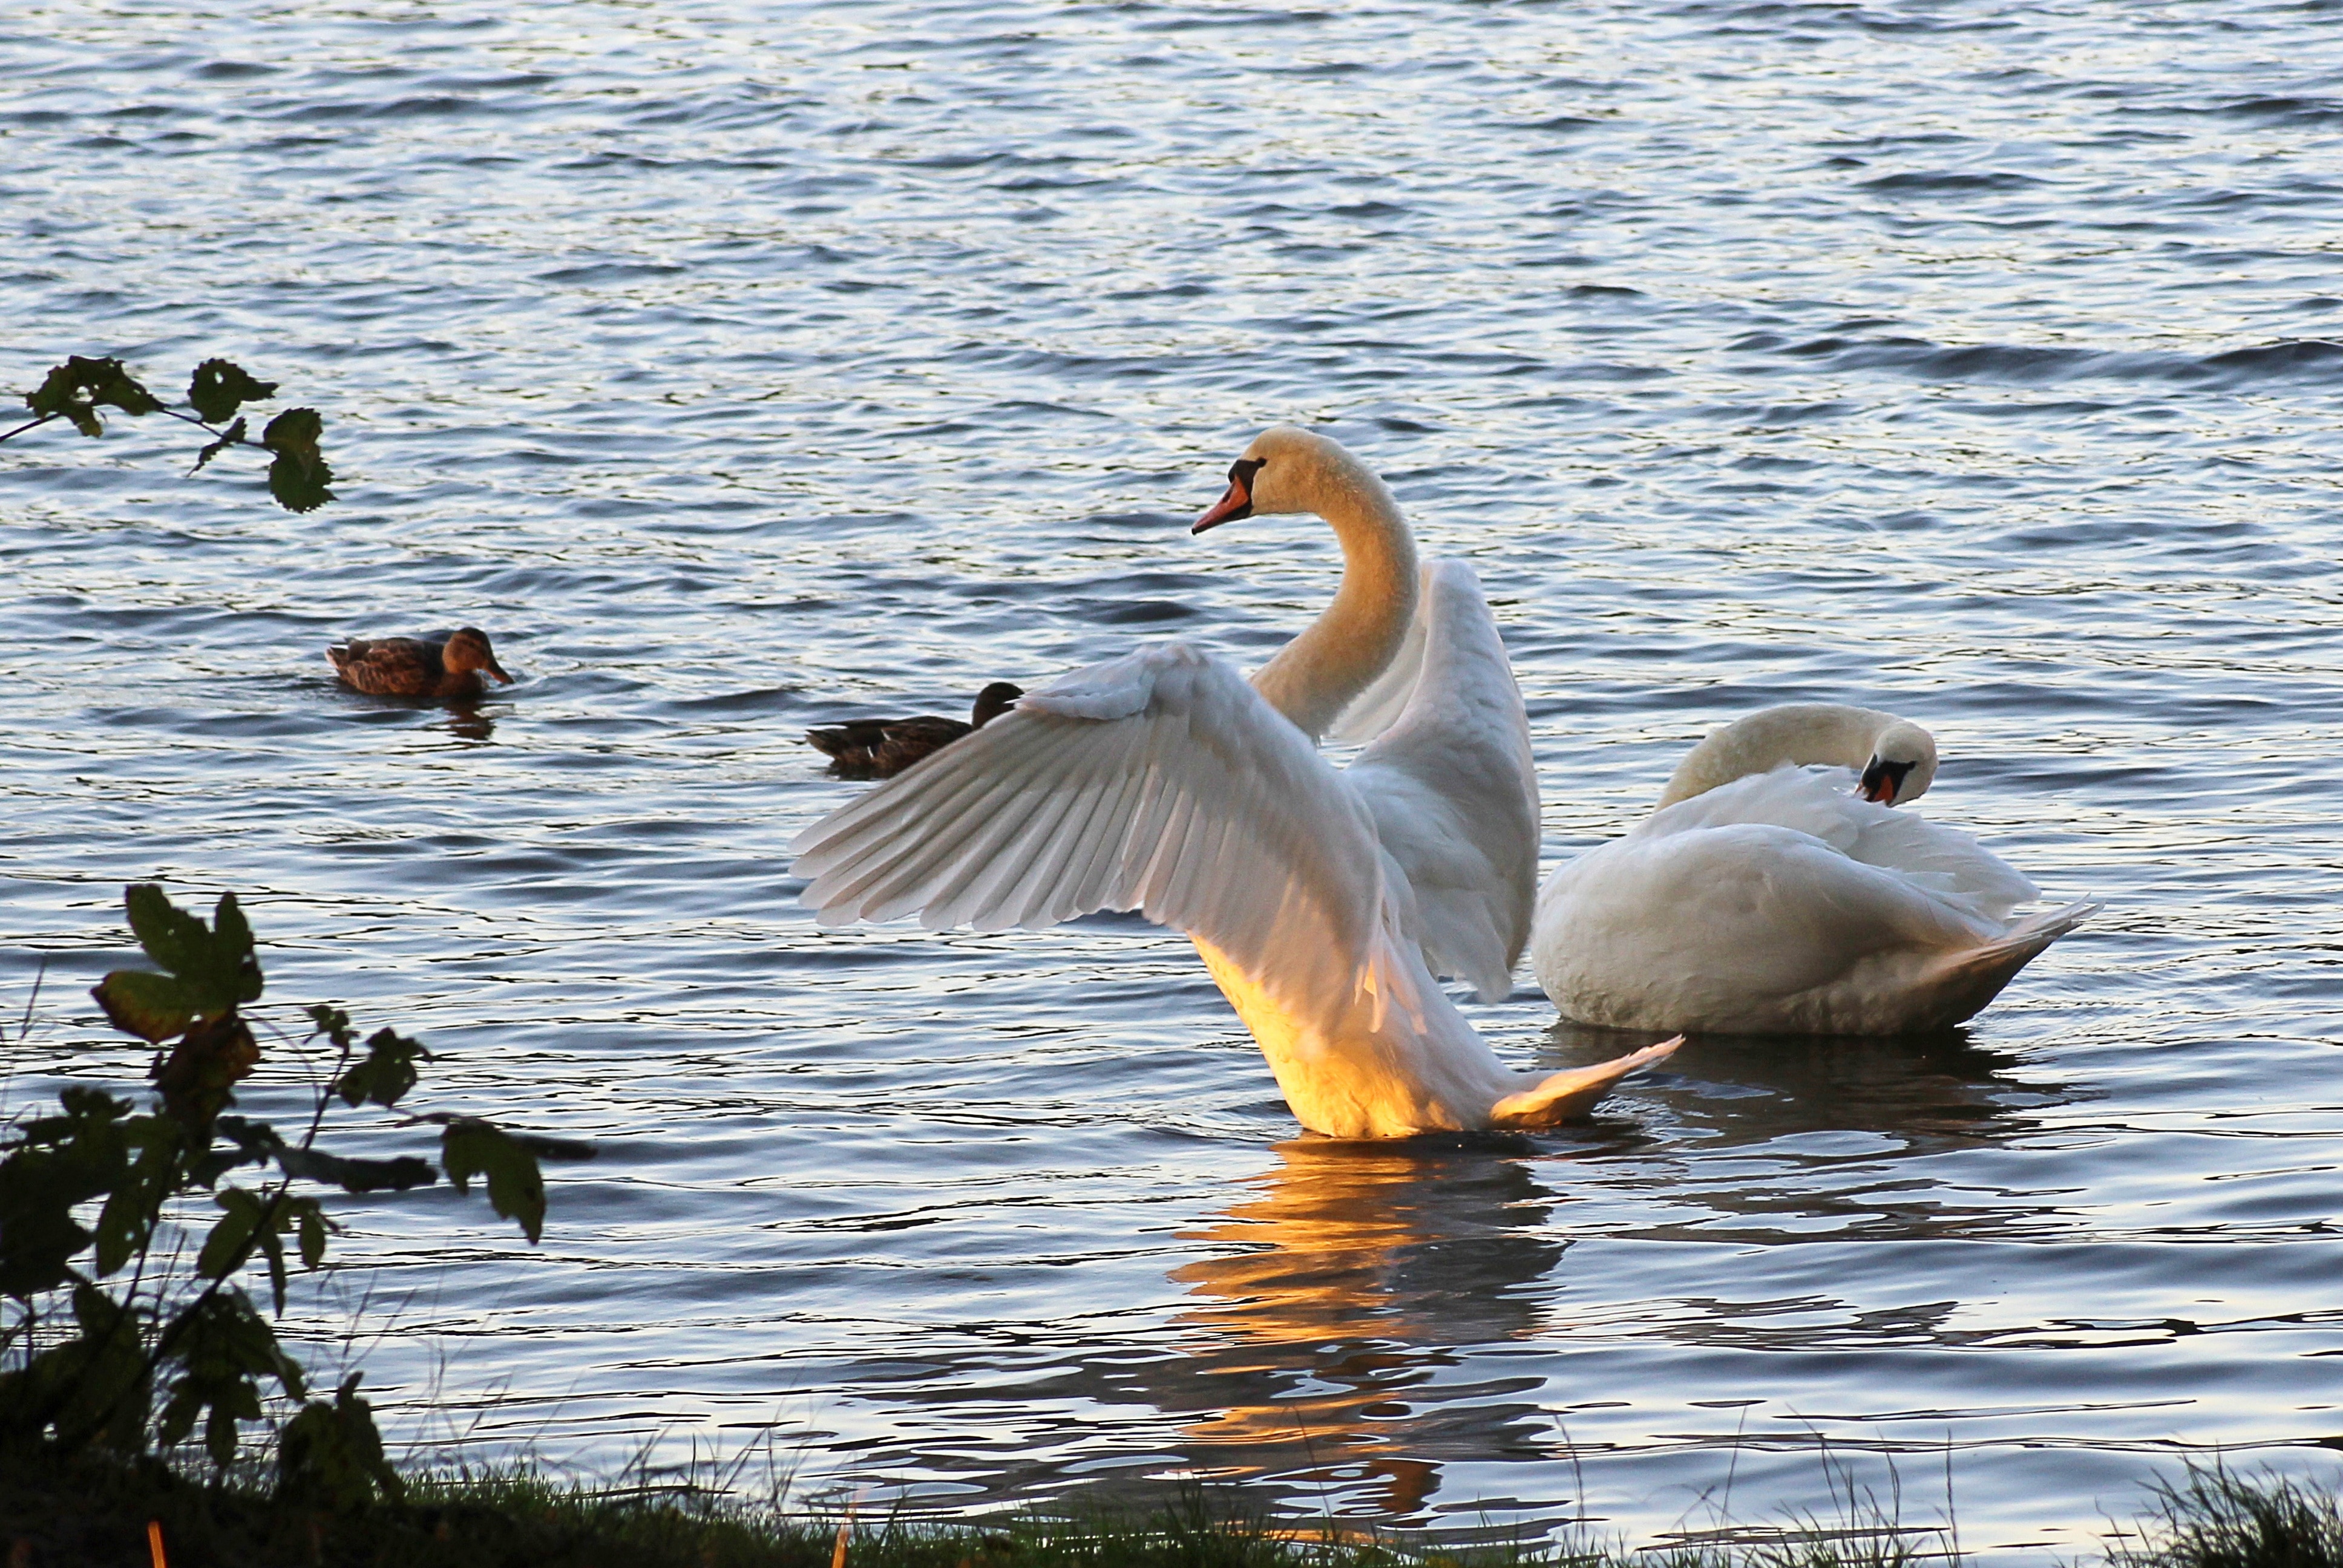 two swan